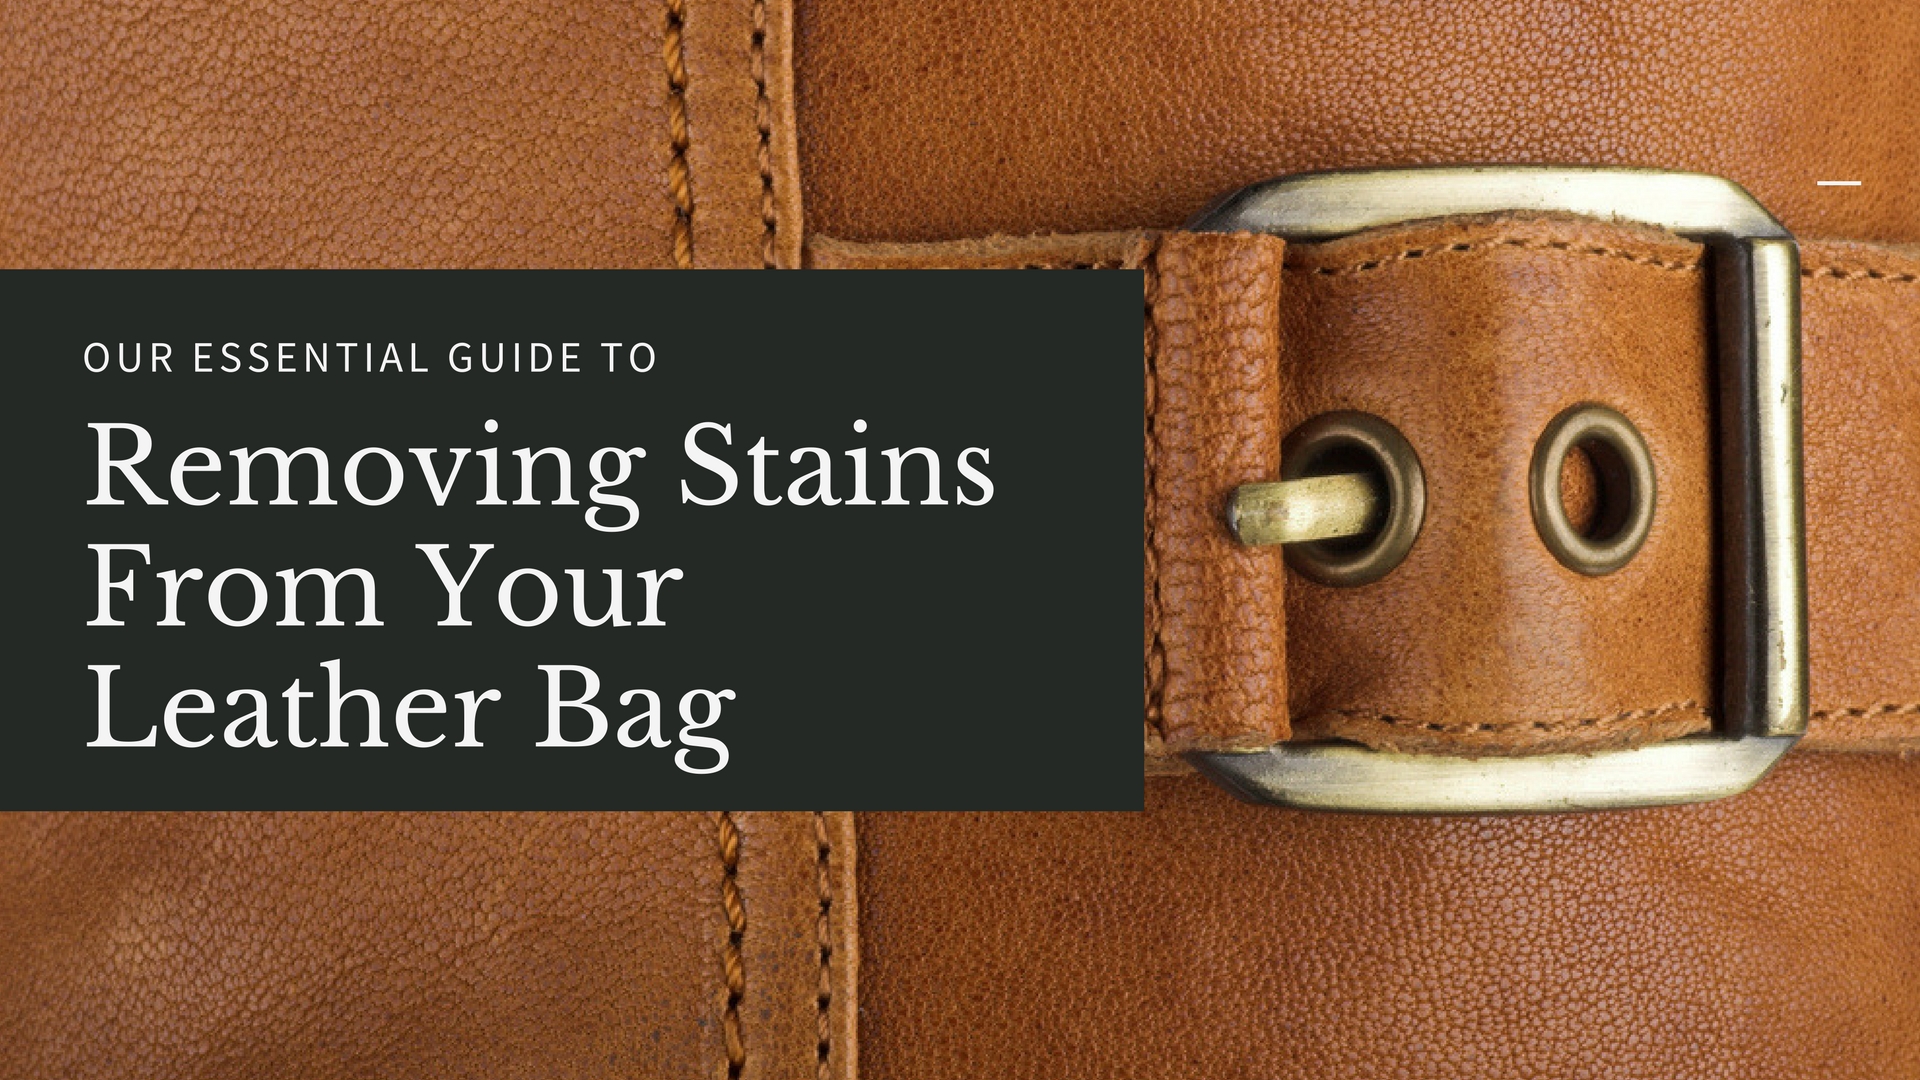 Guide to Clean Leather Bags at Home: Cleaning & Care